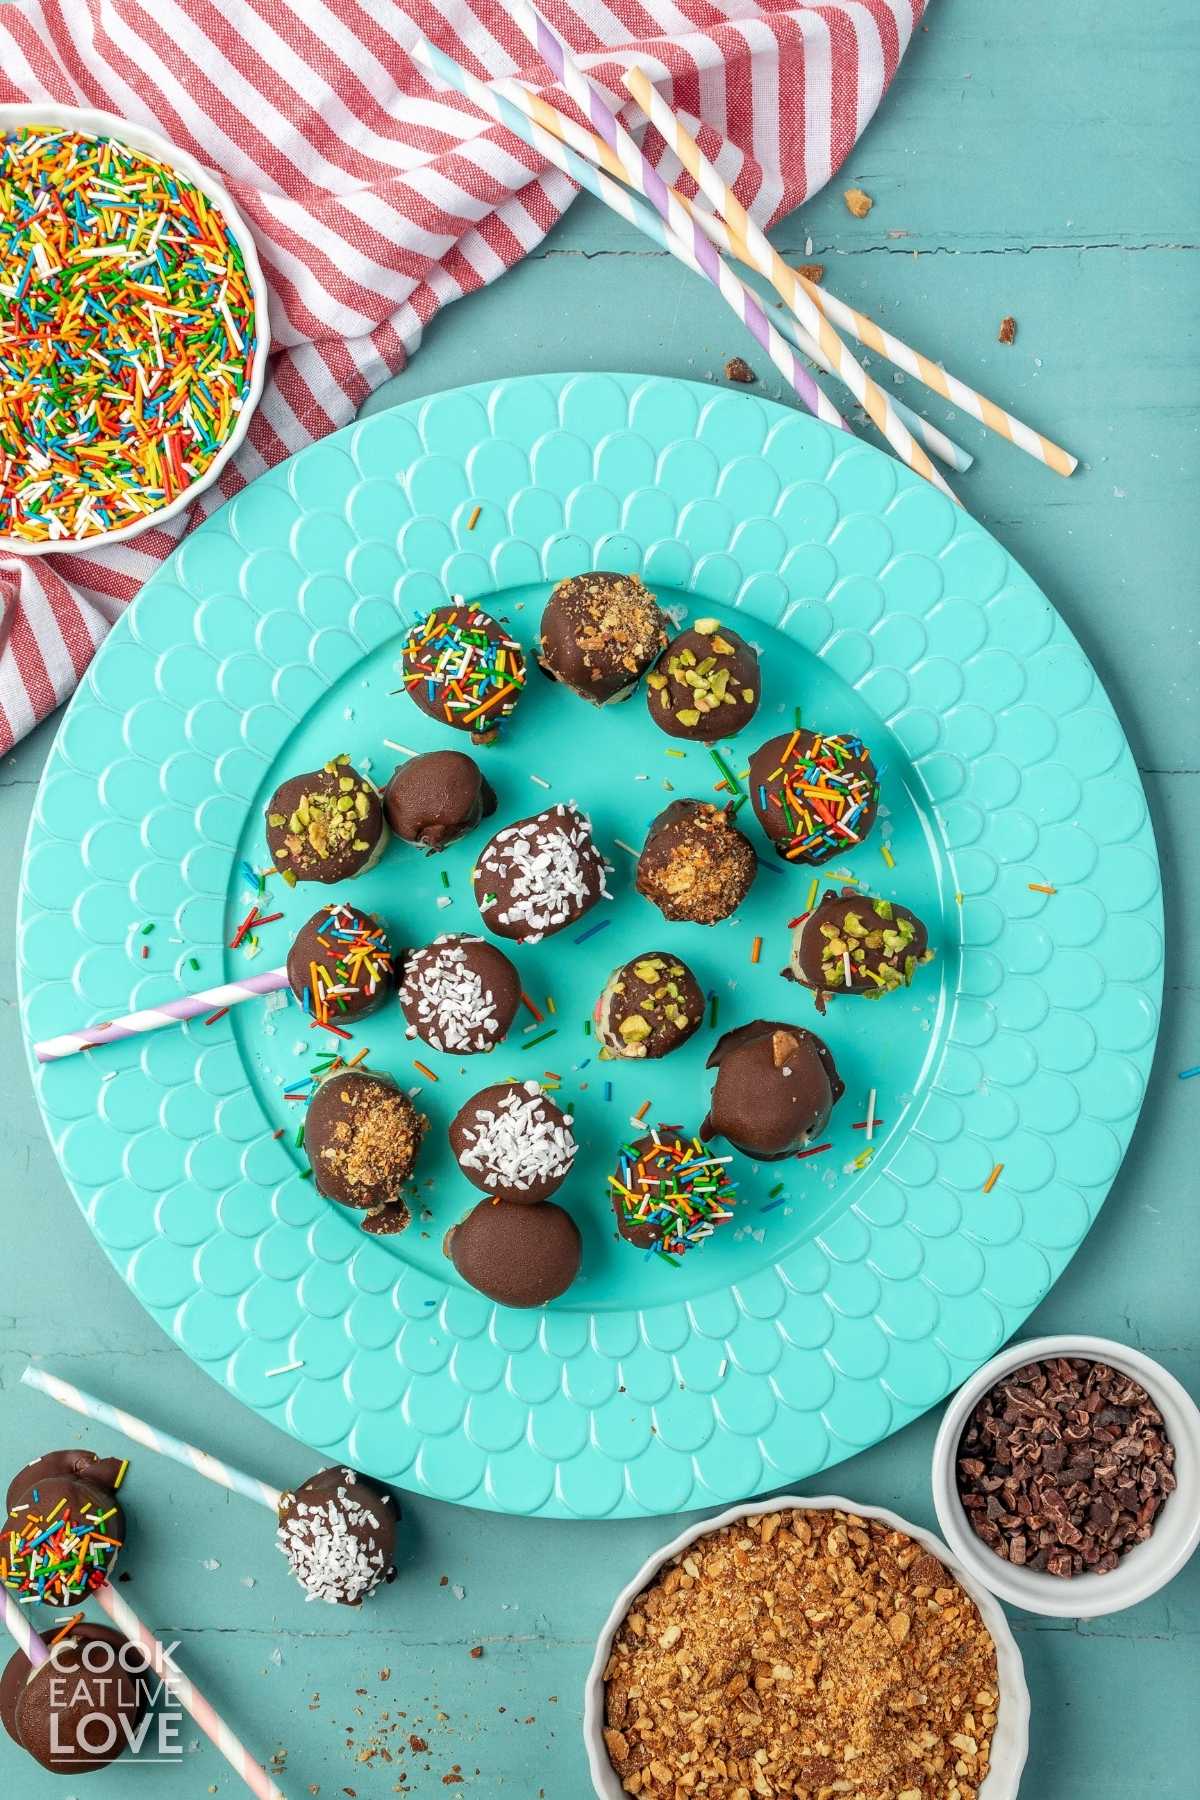 Chocolate covered bananas on a aqua plate with sprinkles to the sides and straws.